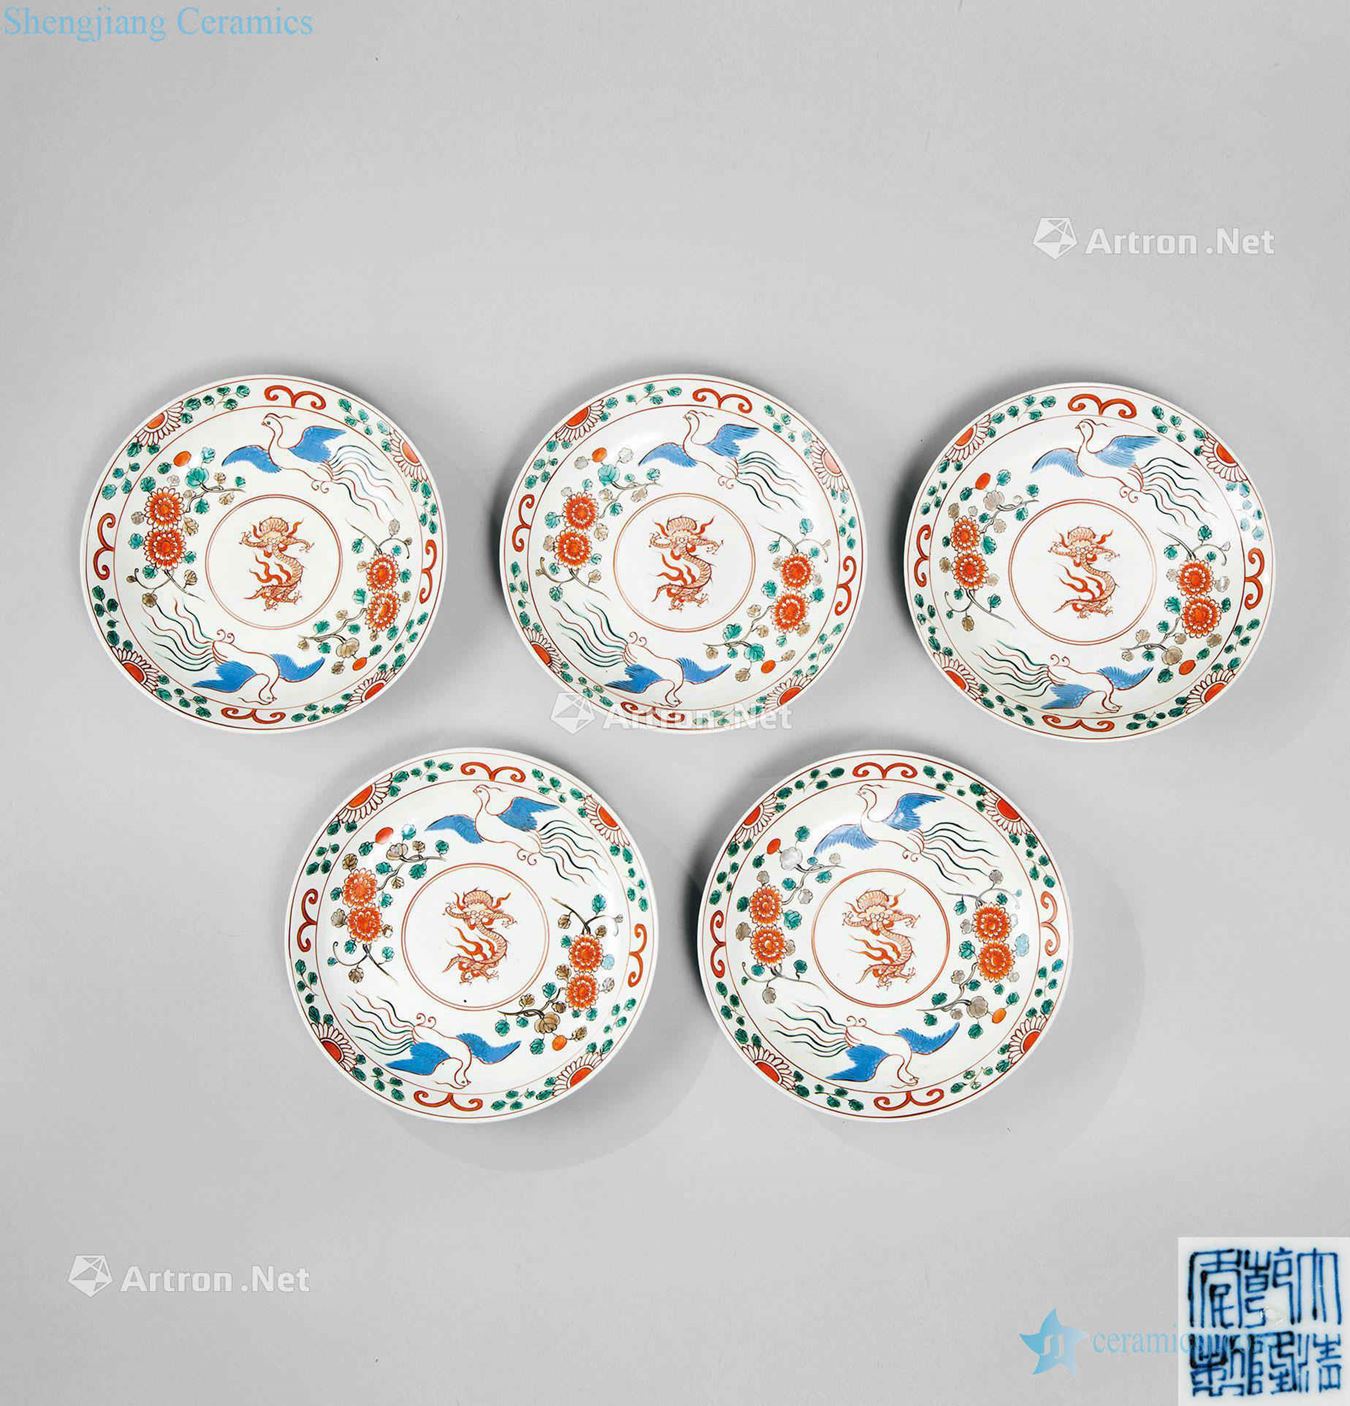 In the qing dynasty (1644-1911), colorful flower crown tray